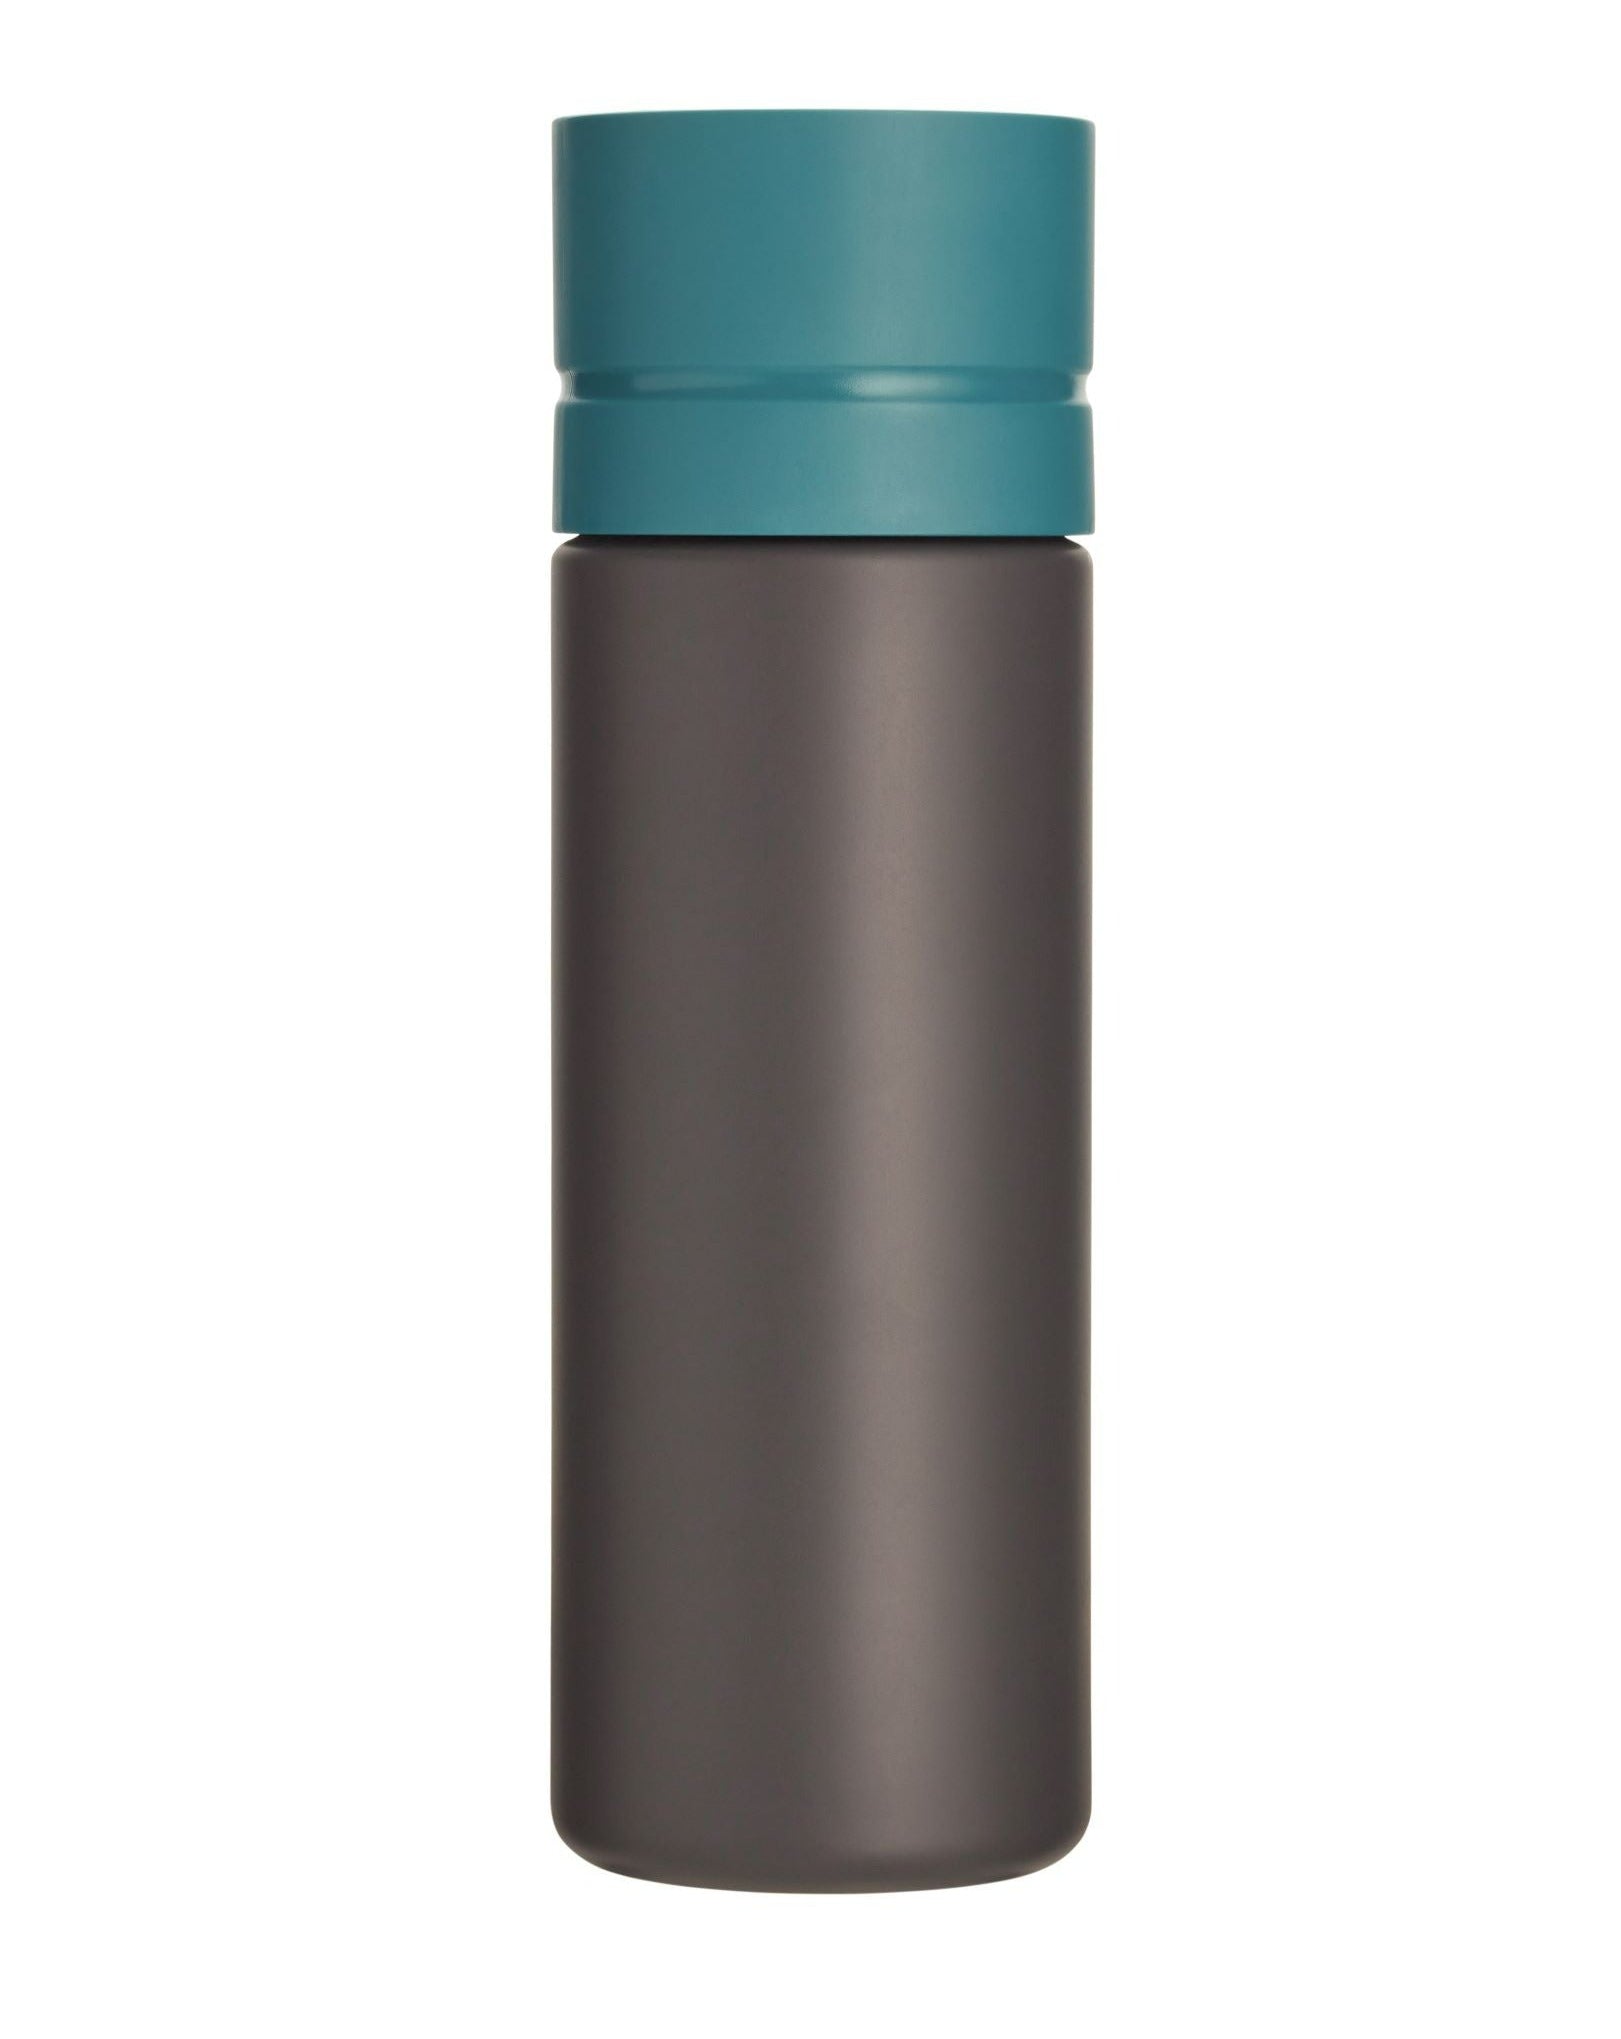 Circular & Co Grey & Teal Sustainable Reusable Water Bottle